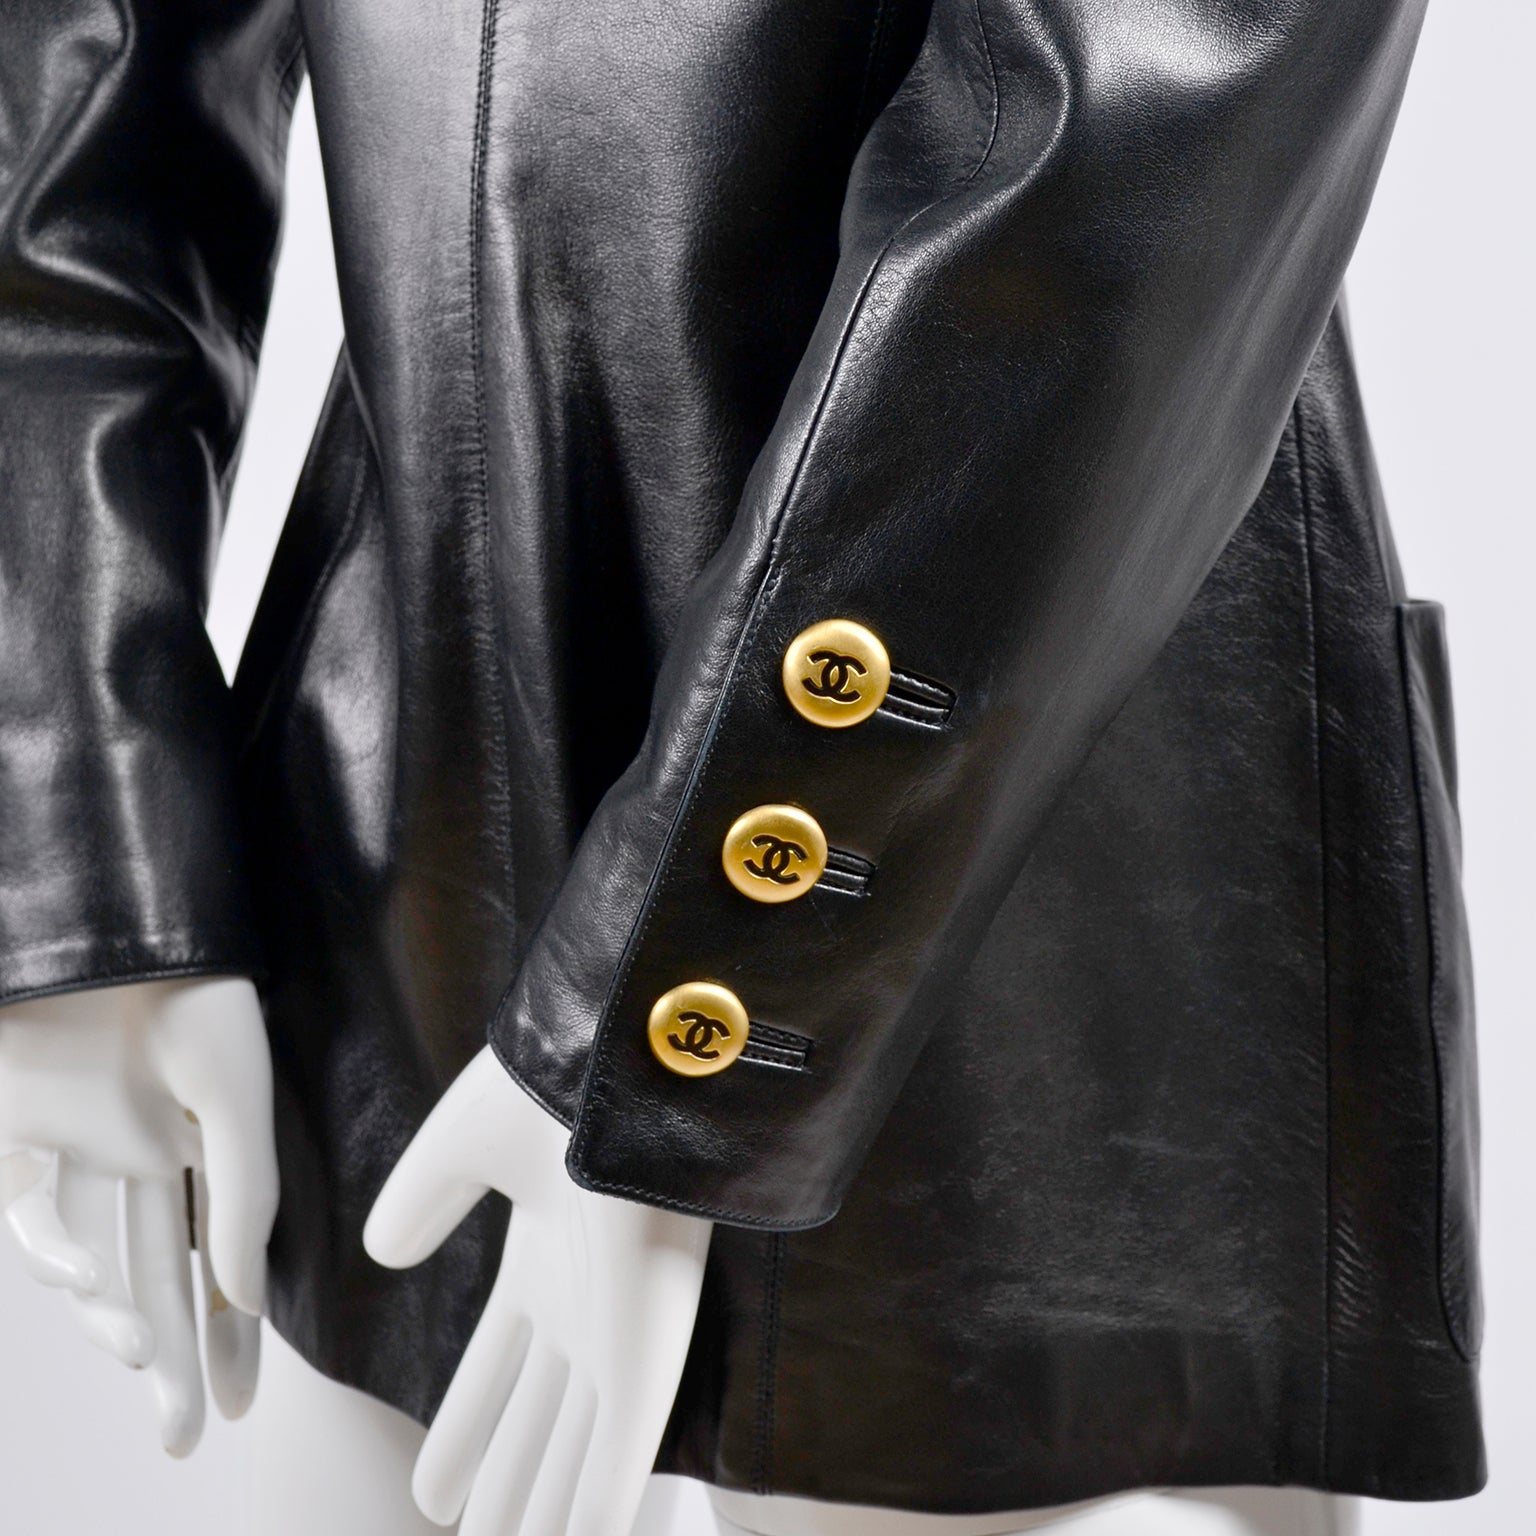 F/W 1992 Chanel Leather Jacket Black w/ Quilting & CC Logo Brass Buttons 6/8